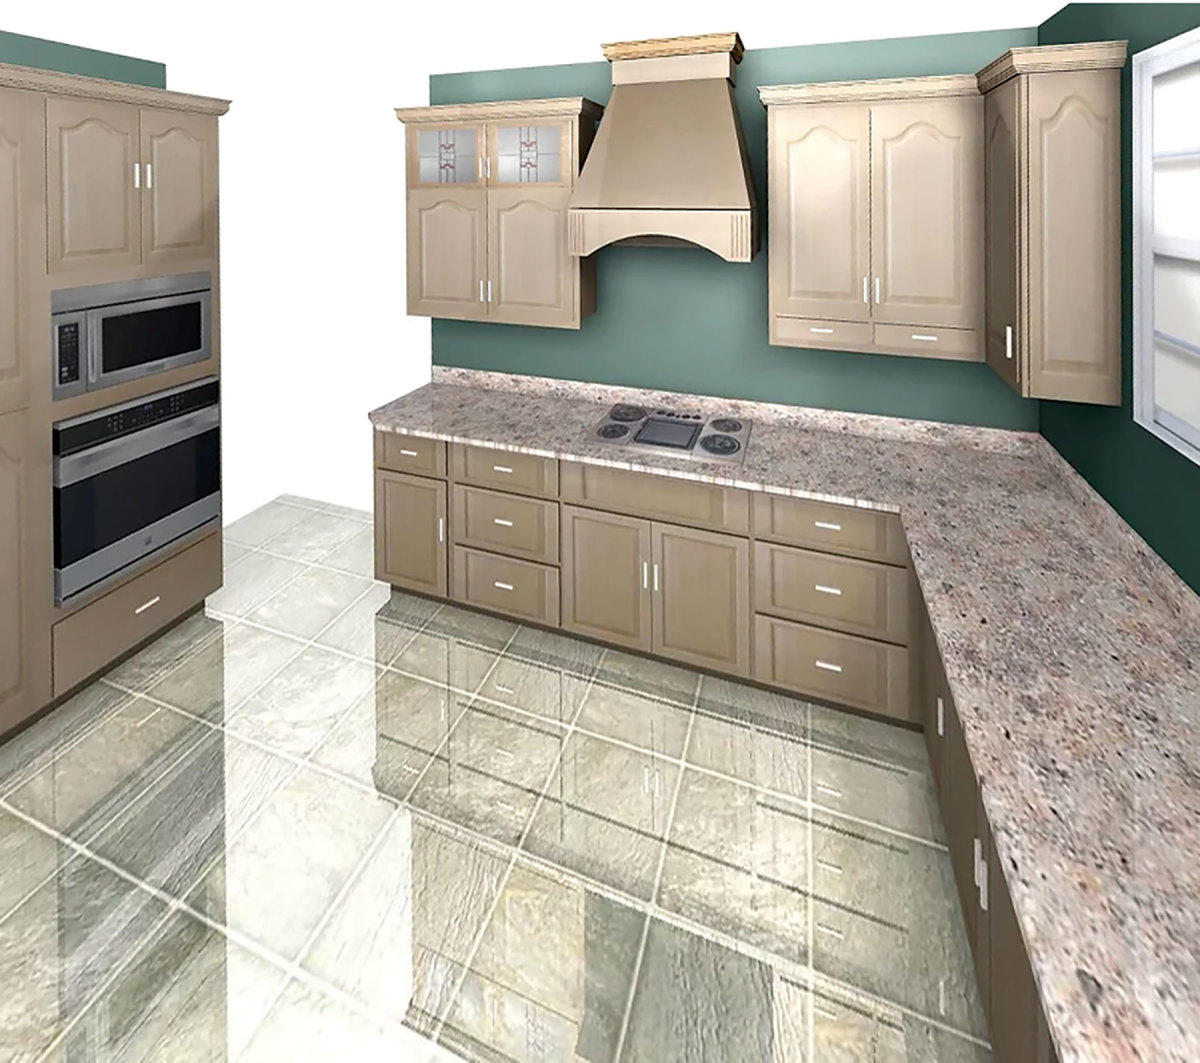 A rendered kitchen design, produced with software from Cabinet Pro.